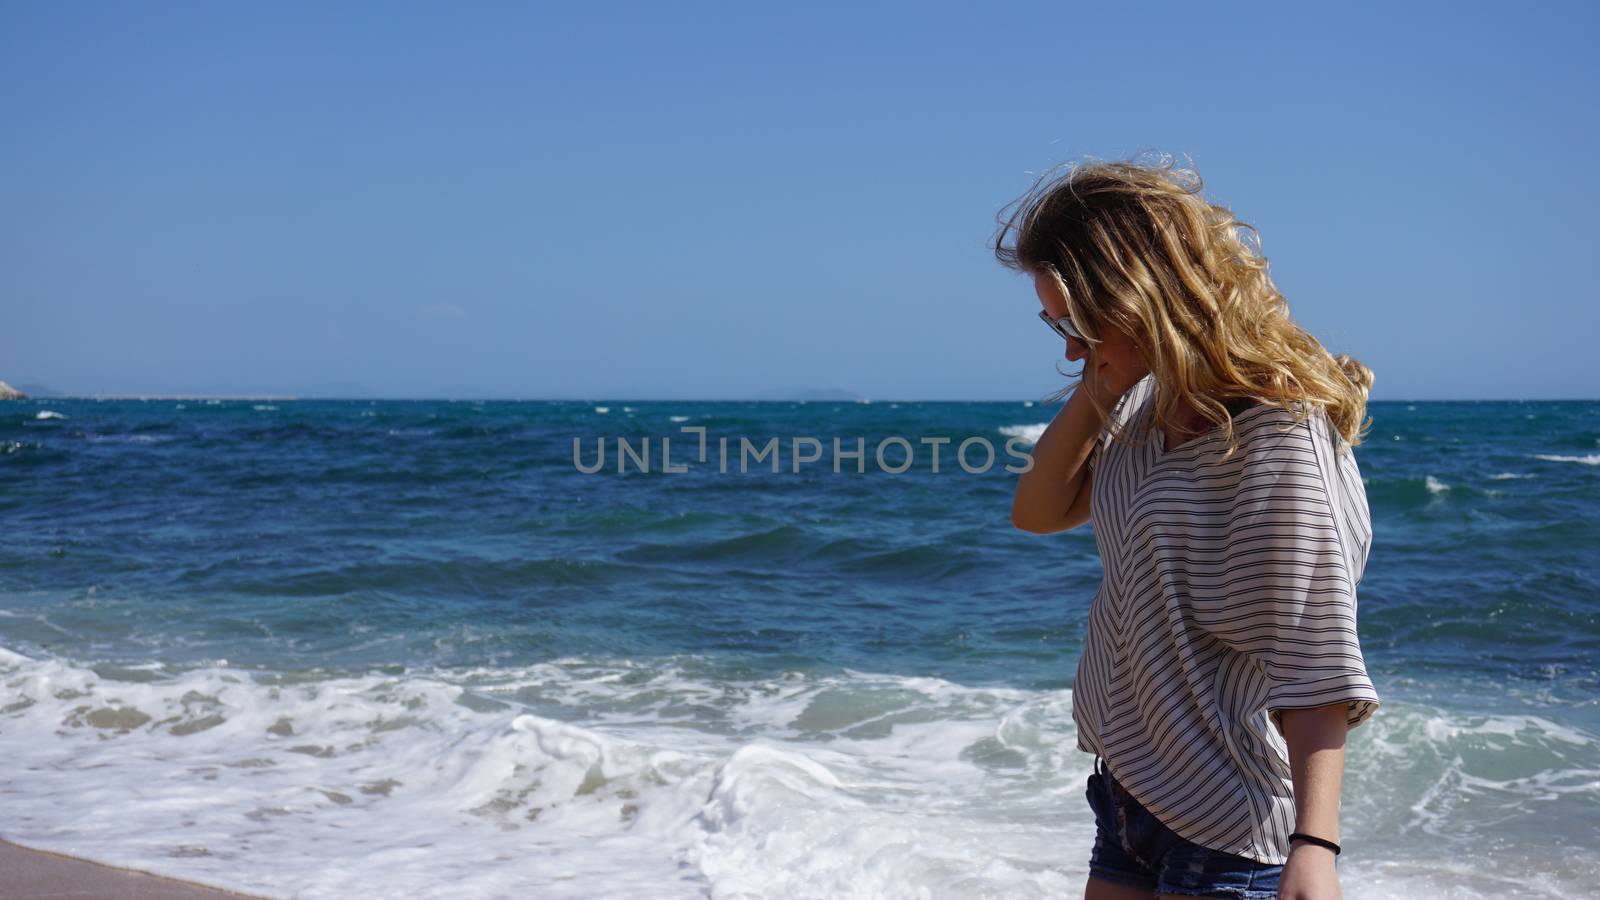 Beautiful bohemian styled and tanned girl at the beach in sunlight by natali_brill